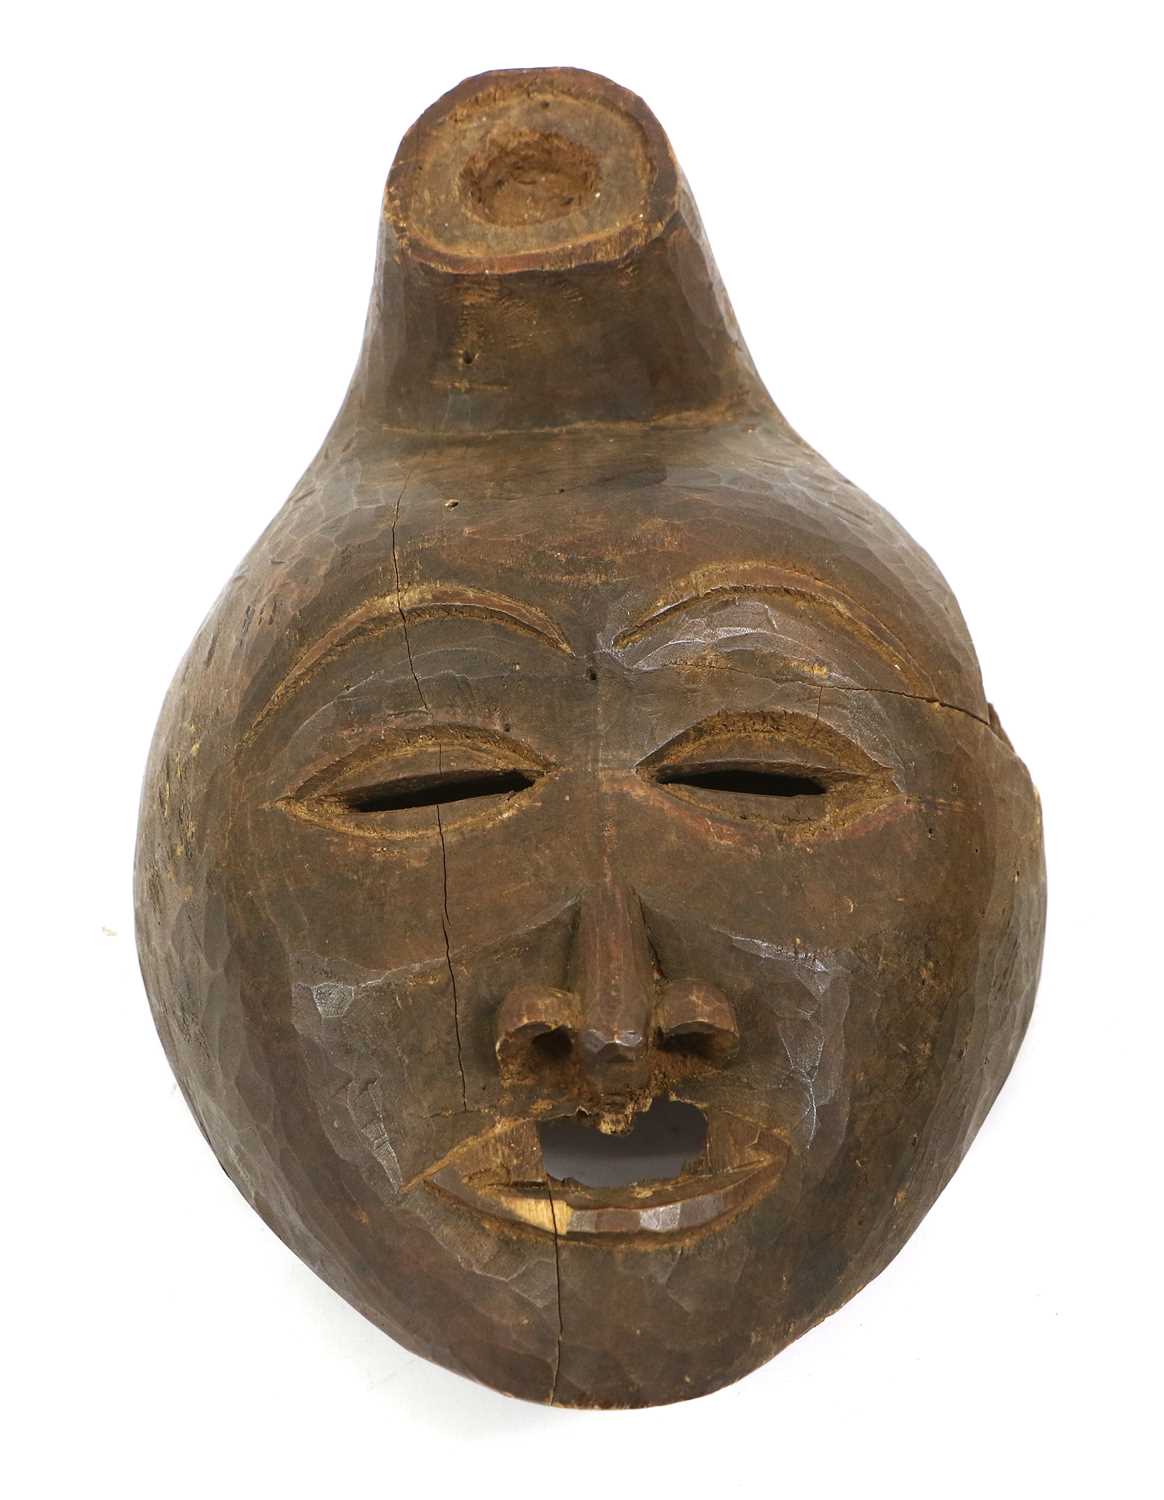 A Dan Small Carved Wood Mask, Ivory Coast, with heart shape face, pierced swollen eyelids, long nose - Image 2 of 6